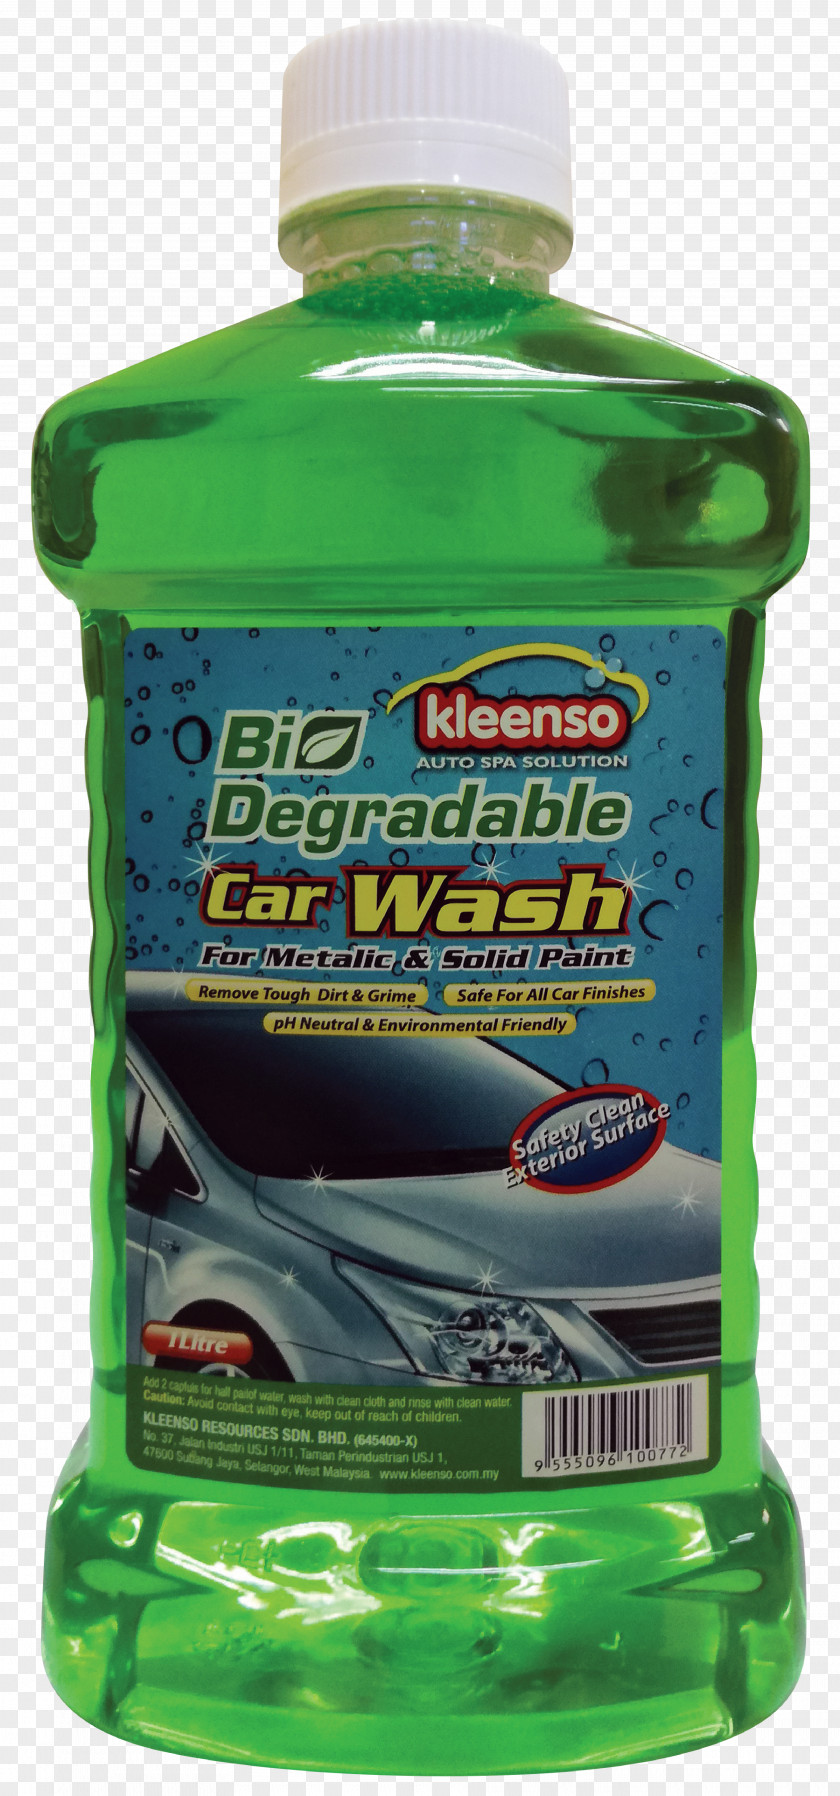 Car Wash Cleaning Washing Kleenso Resources Sdn. Bhd. PNG